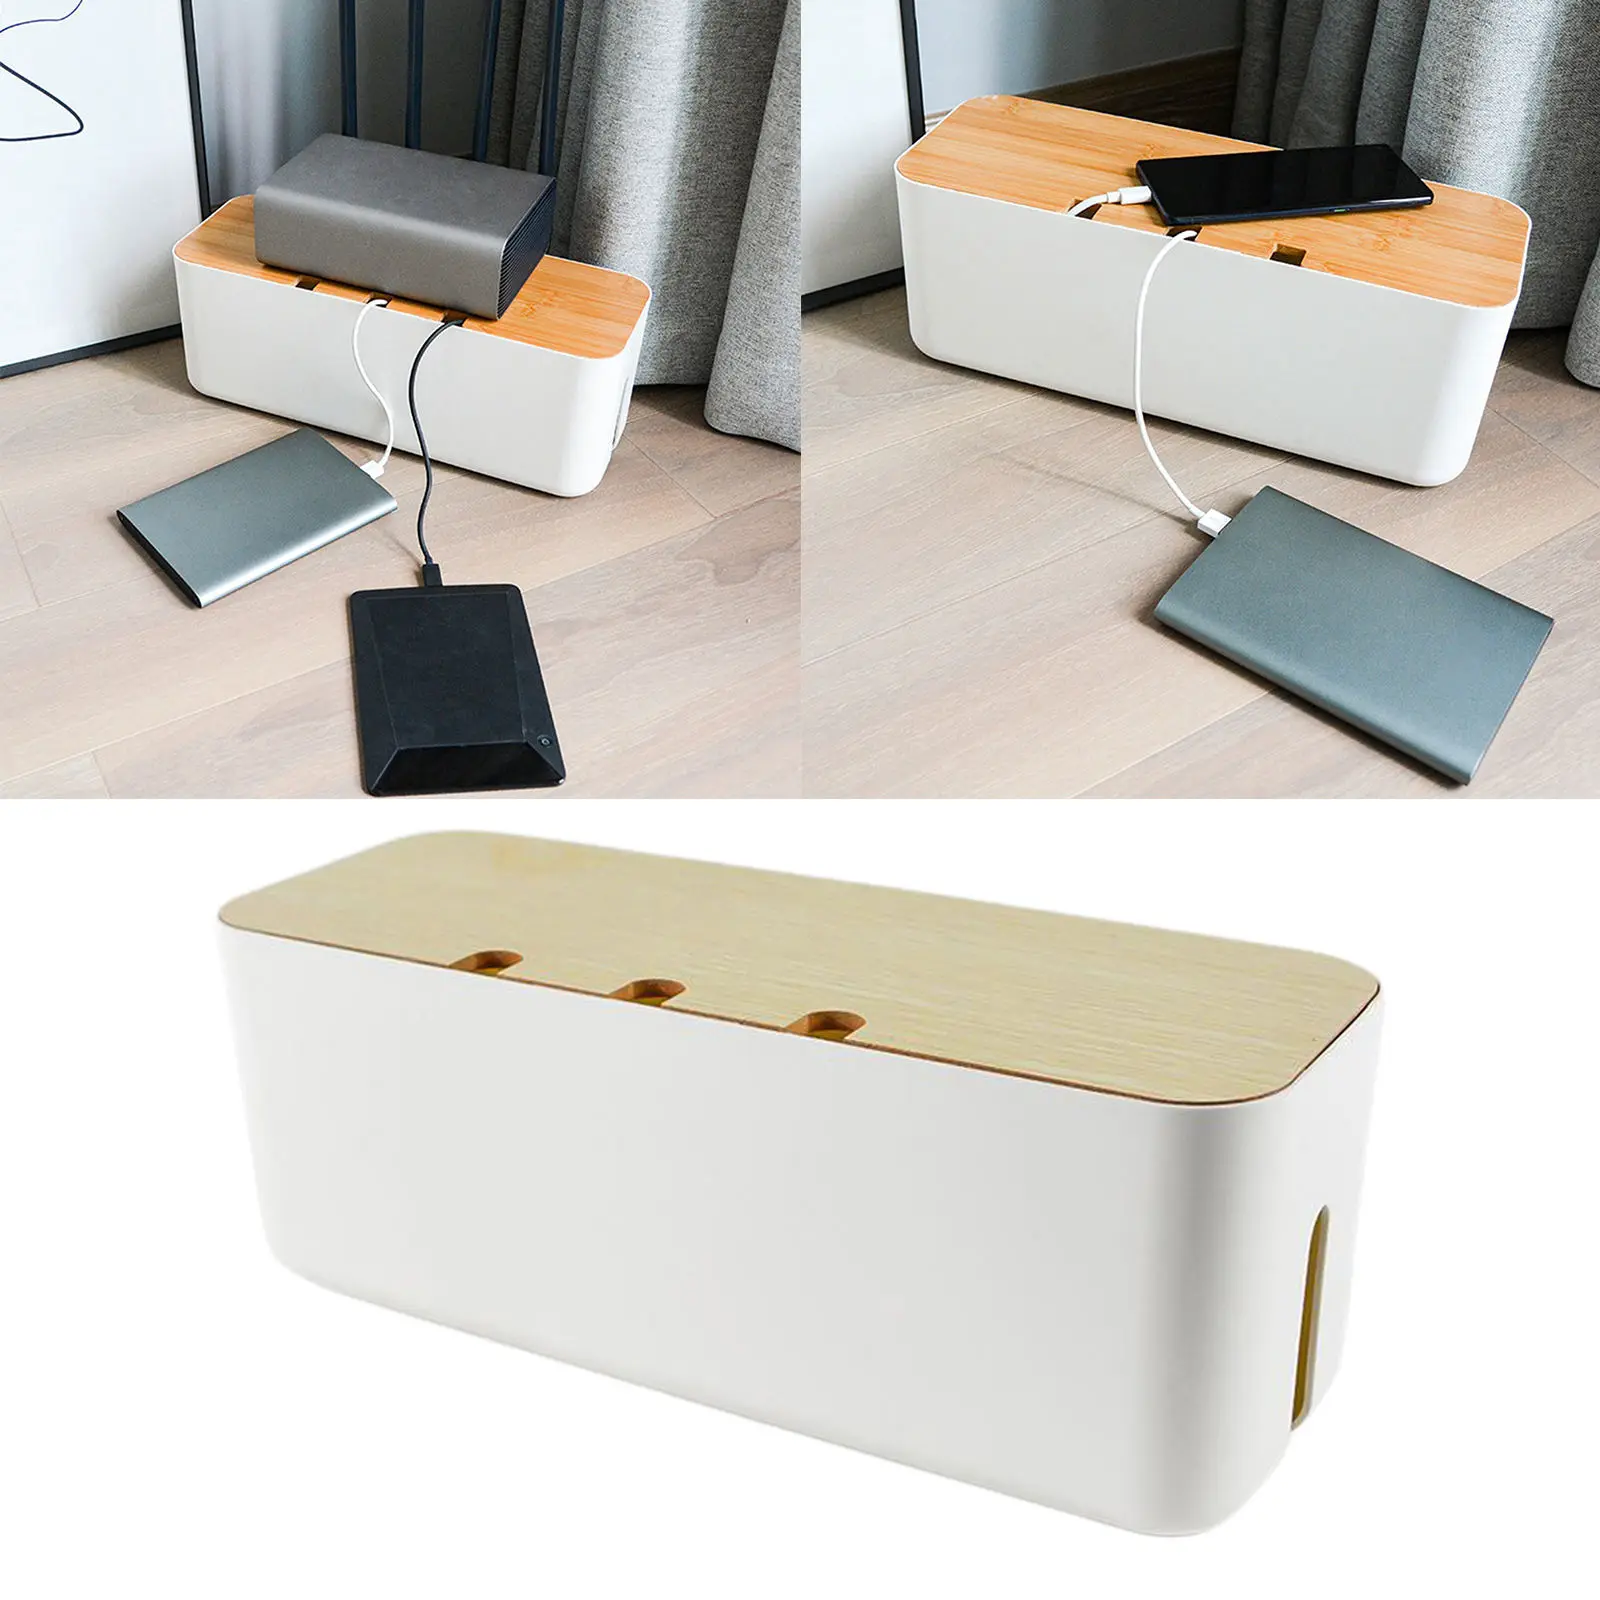 Cable Management Box ABS Wood Lid Wire Cable Organizer Box Power Stripe Surge Protector Covering Hiding for Desktop Home Office